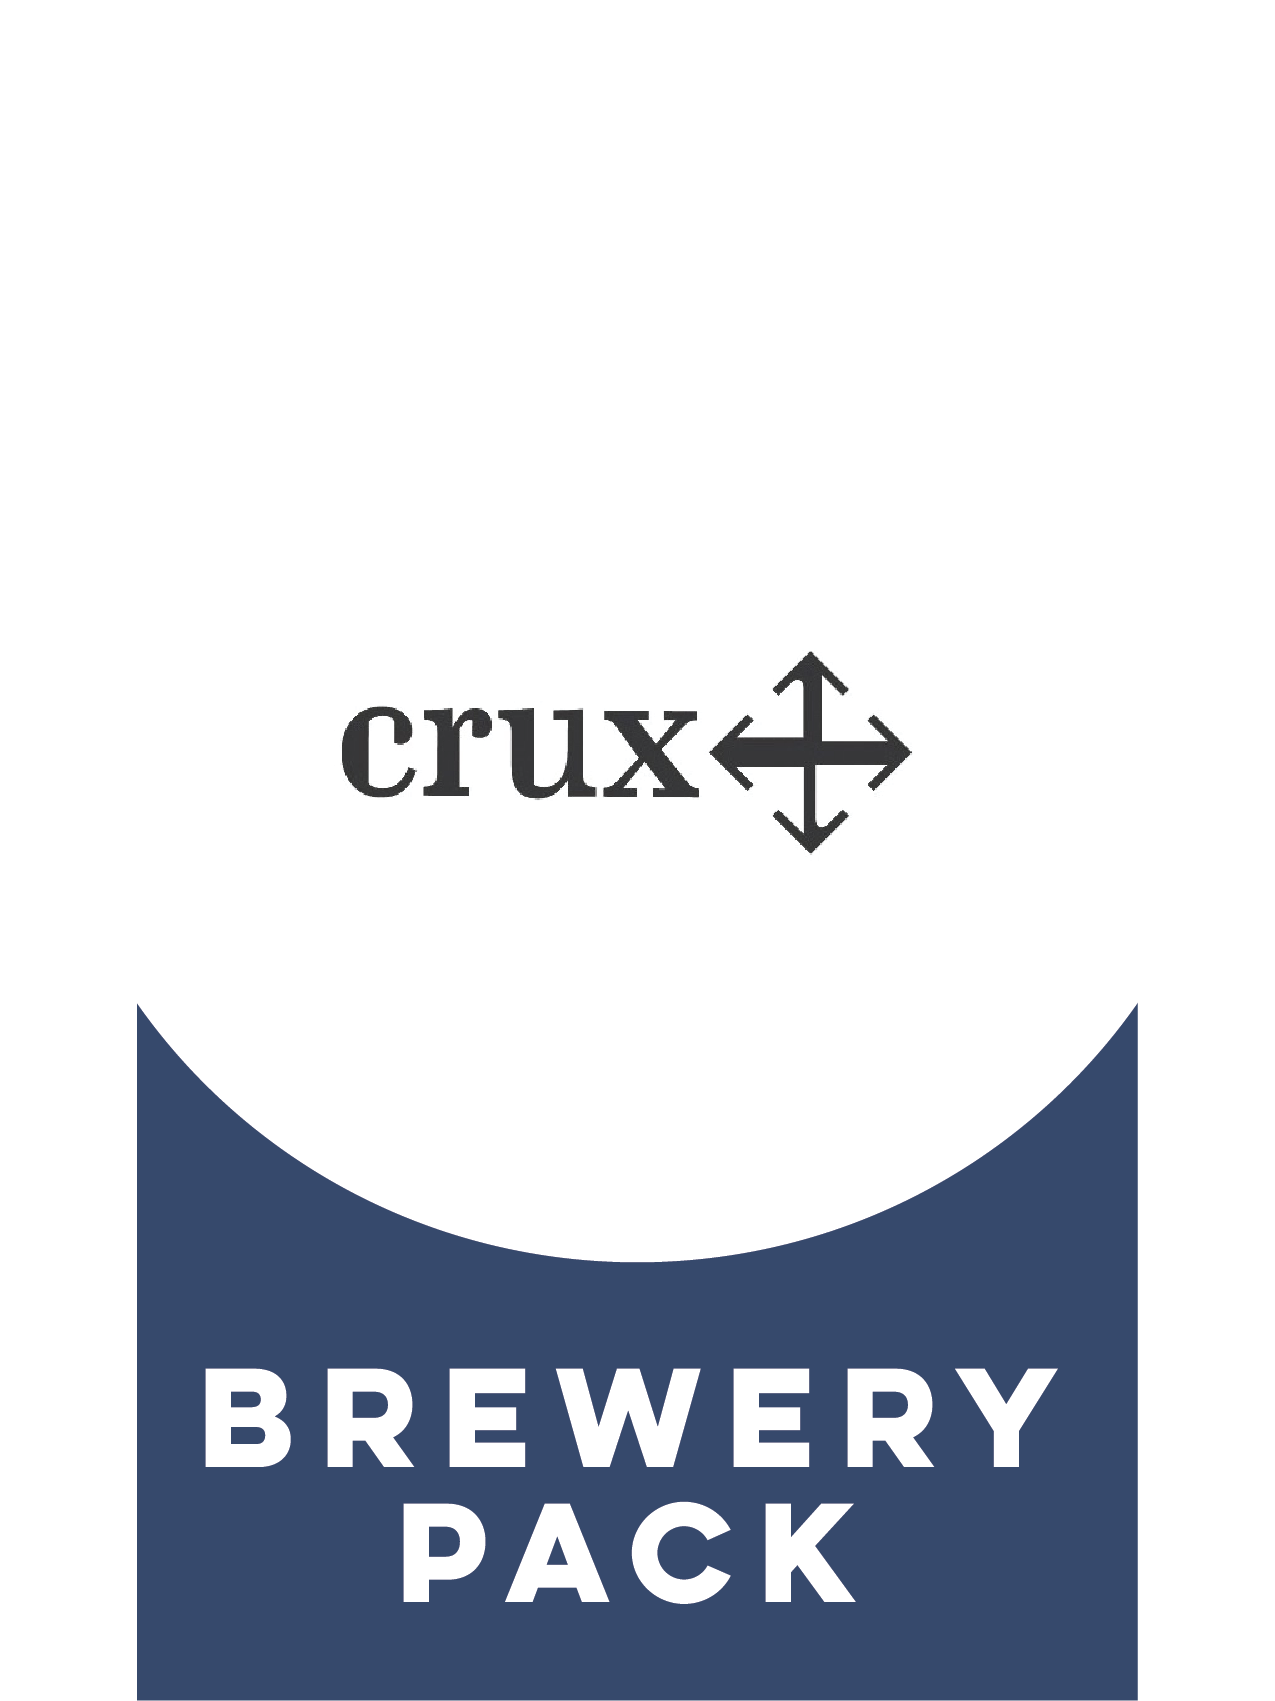 -Crux- Crux Brewery Pack-Packs & Cases- Only @ Beer Republic - The best online beer store for American & Canadian craft beer - Buy beer online from the USA and Canada - Bier online kopen - Amerikaans bier kopen - Craft beer store - Craft beer kopen - Amerikanisch bier kaufen - Bier online kaufen - Acheter biere online - IPA - Stout - Porter - New England IPA - Hazy IPA - Imperial Stout - Barrel Aged - Barrel Aged Imperial Stout - Brown - Dark beer - Blond - Blonde - Pilsner - Lager - Wheat - Weizen - Amber 